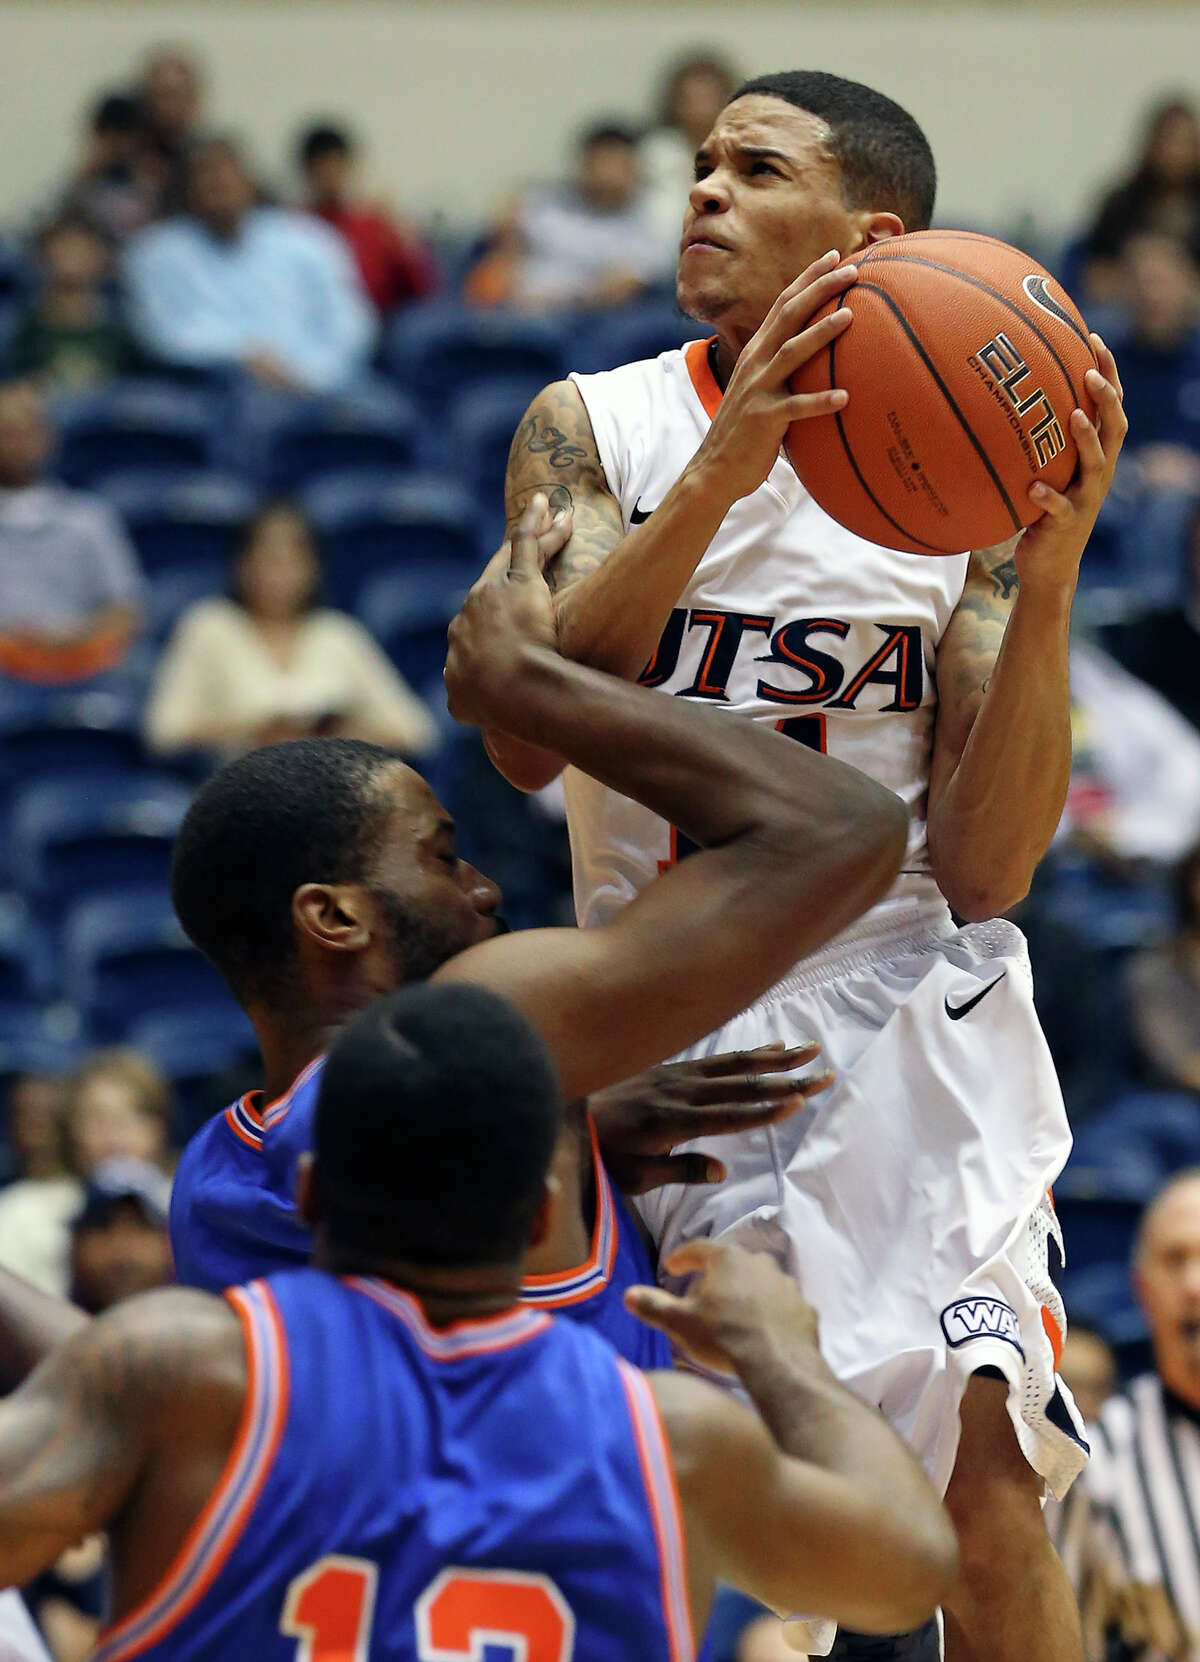 Roadrunner guard Michael Hale III fights up for a shot in the first half as UTSA plays UTA at the UTSA Convocation Center in men's basketball on January 10, 2013.